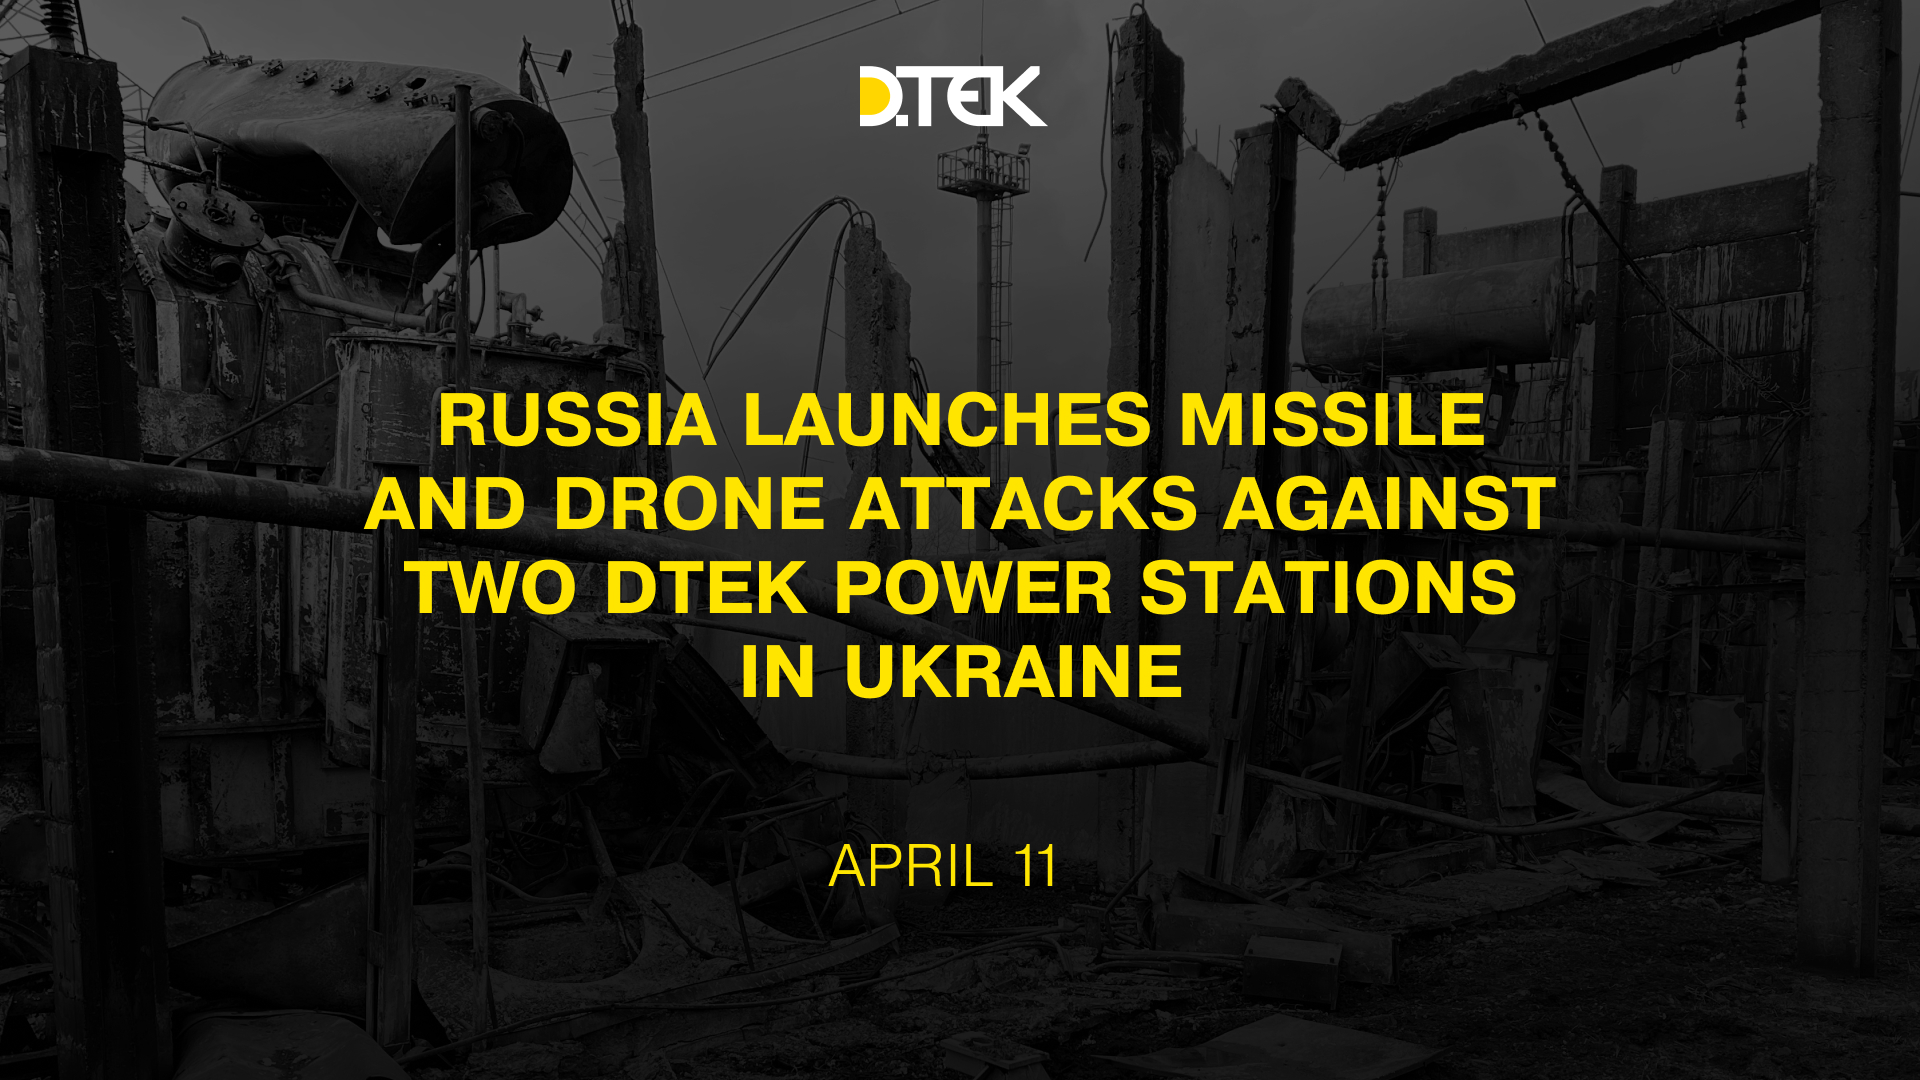 Russia launches missile and drone attacks against two DTEK power stations in Ukraine